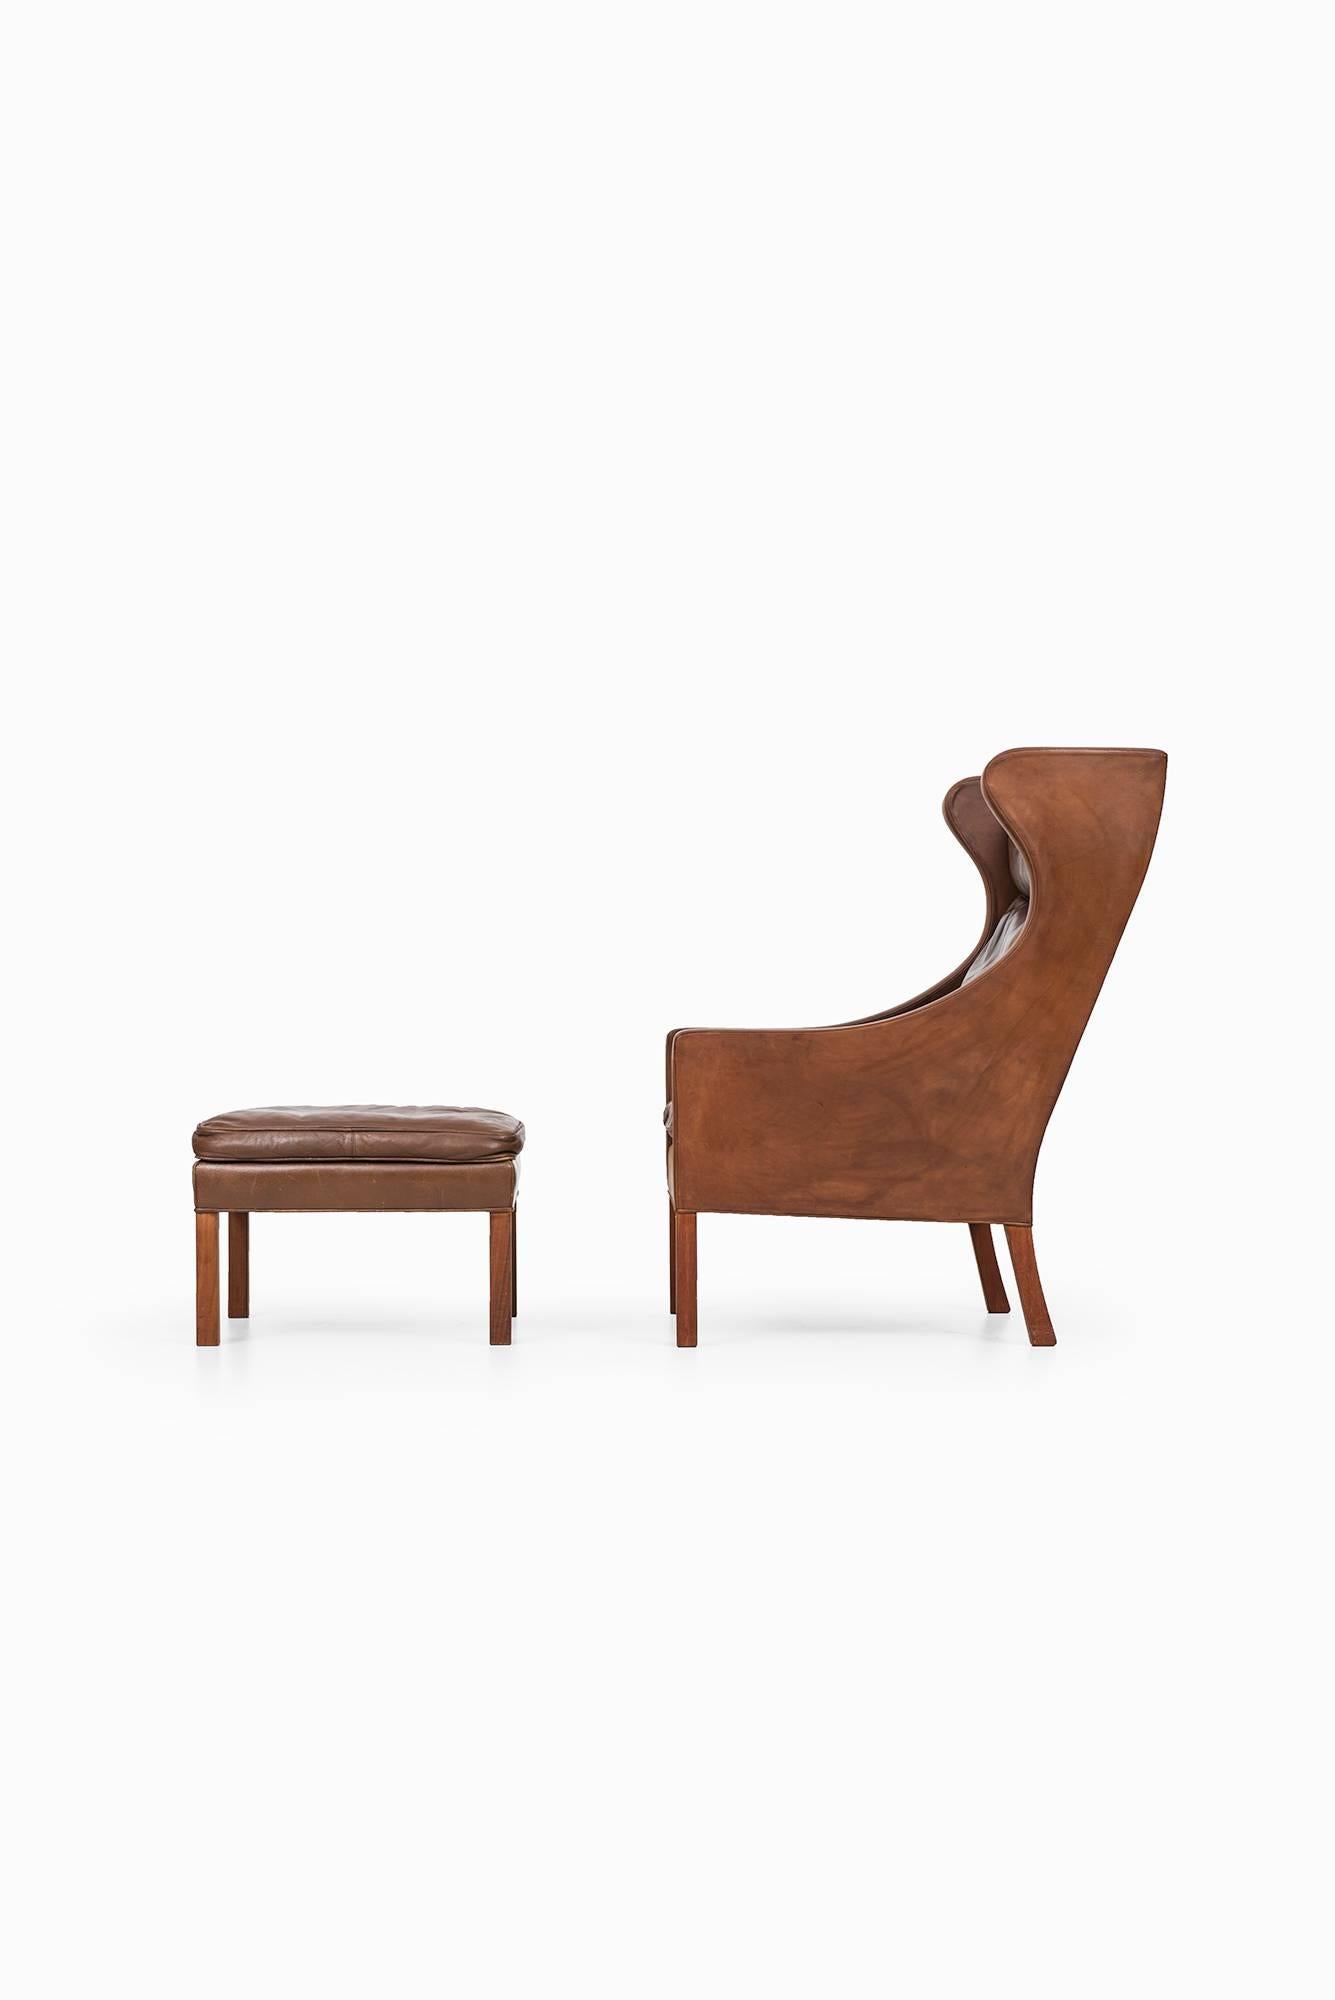 Rare wingback easy chair model 2204 and stool model 2202 designed by Børge Mogensen. Produced by Fredericia Stolefabrik in Denmark.